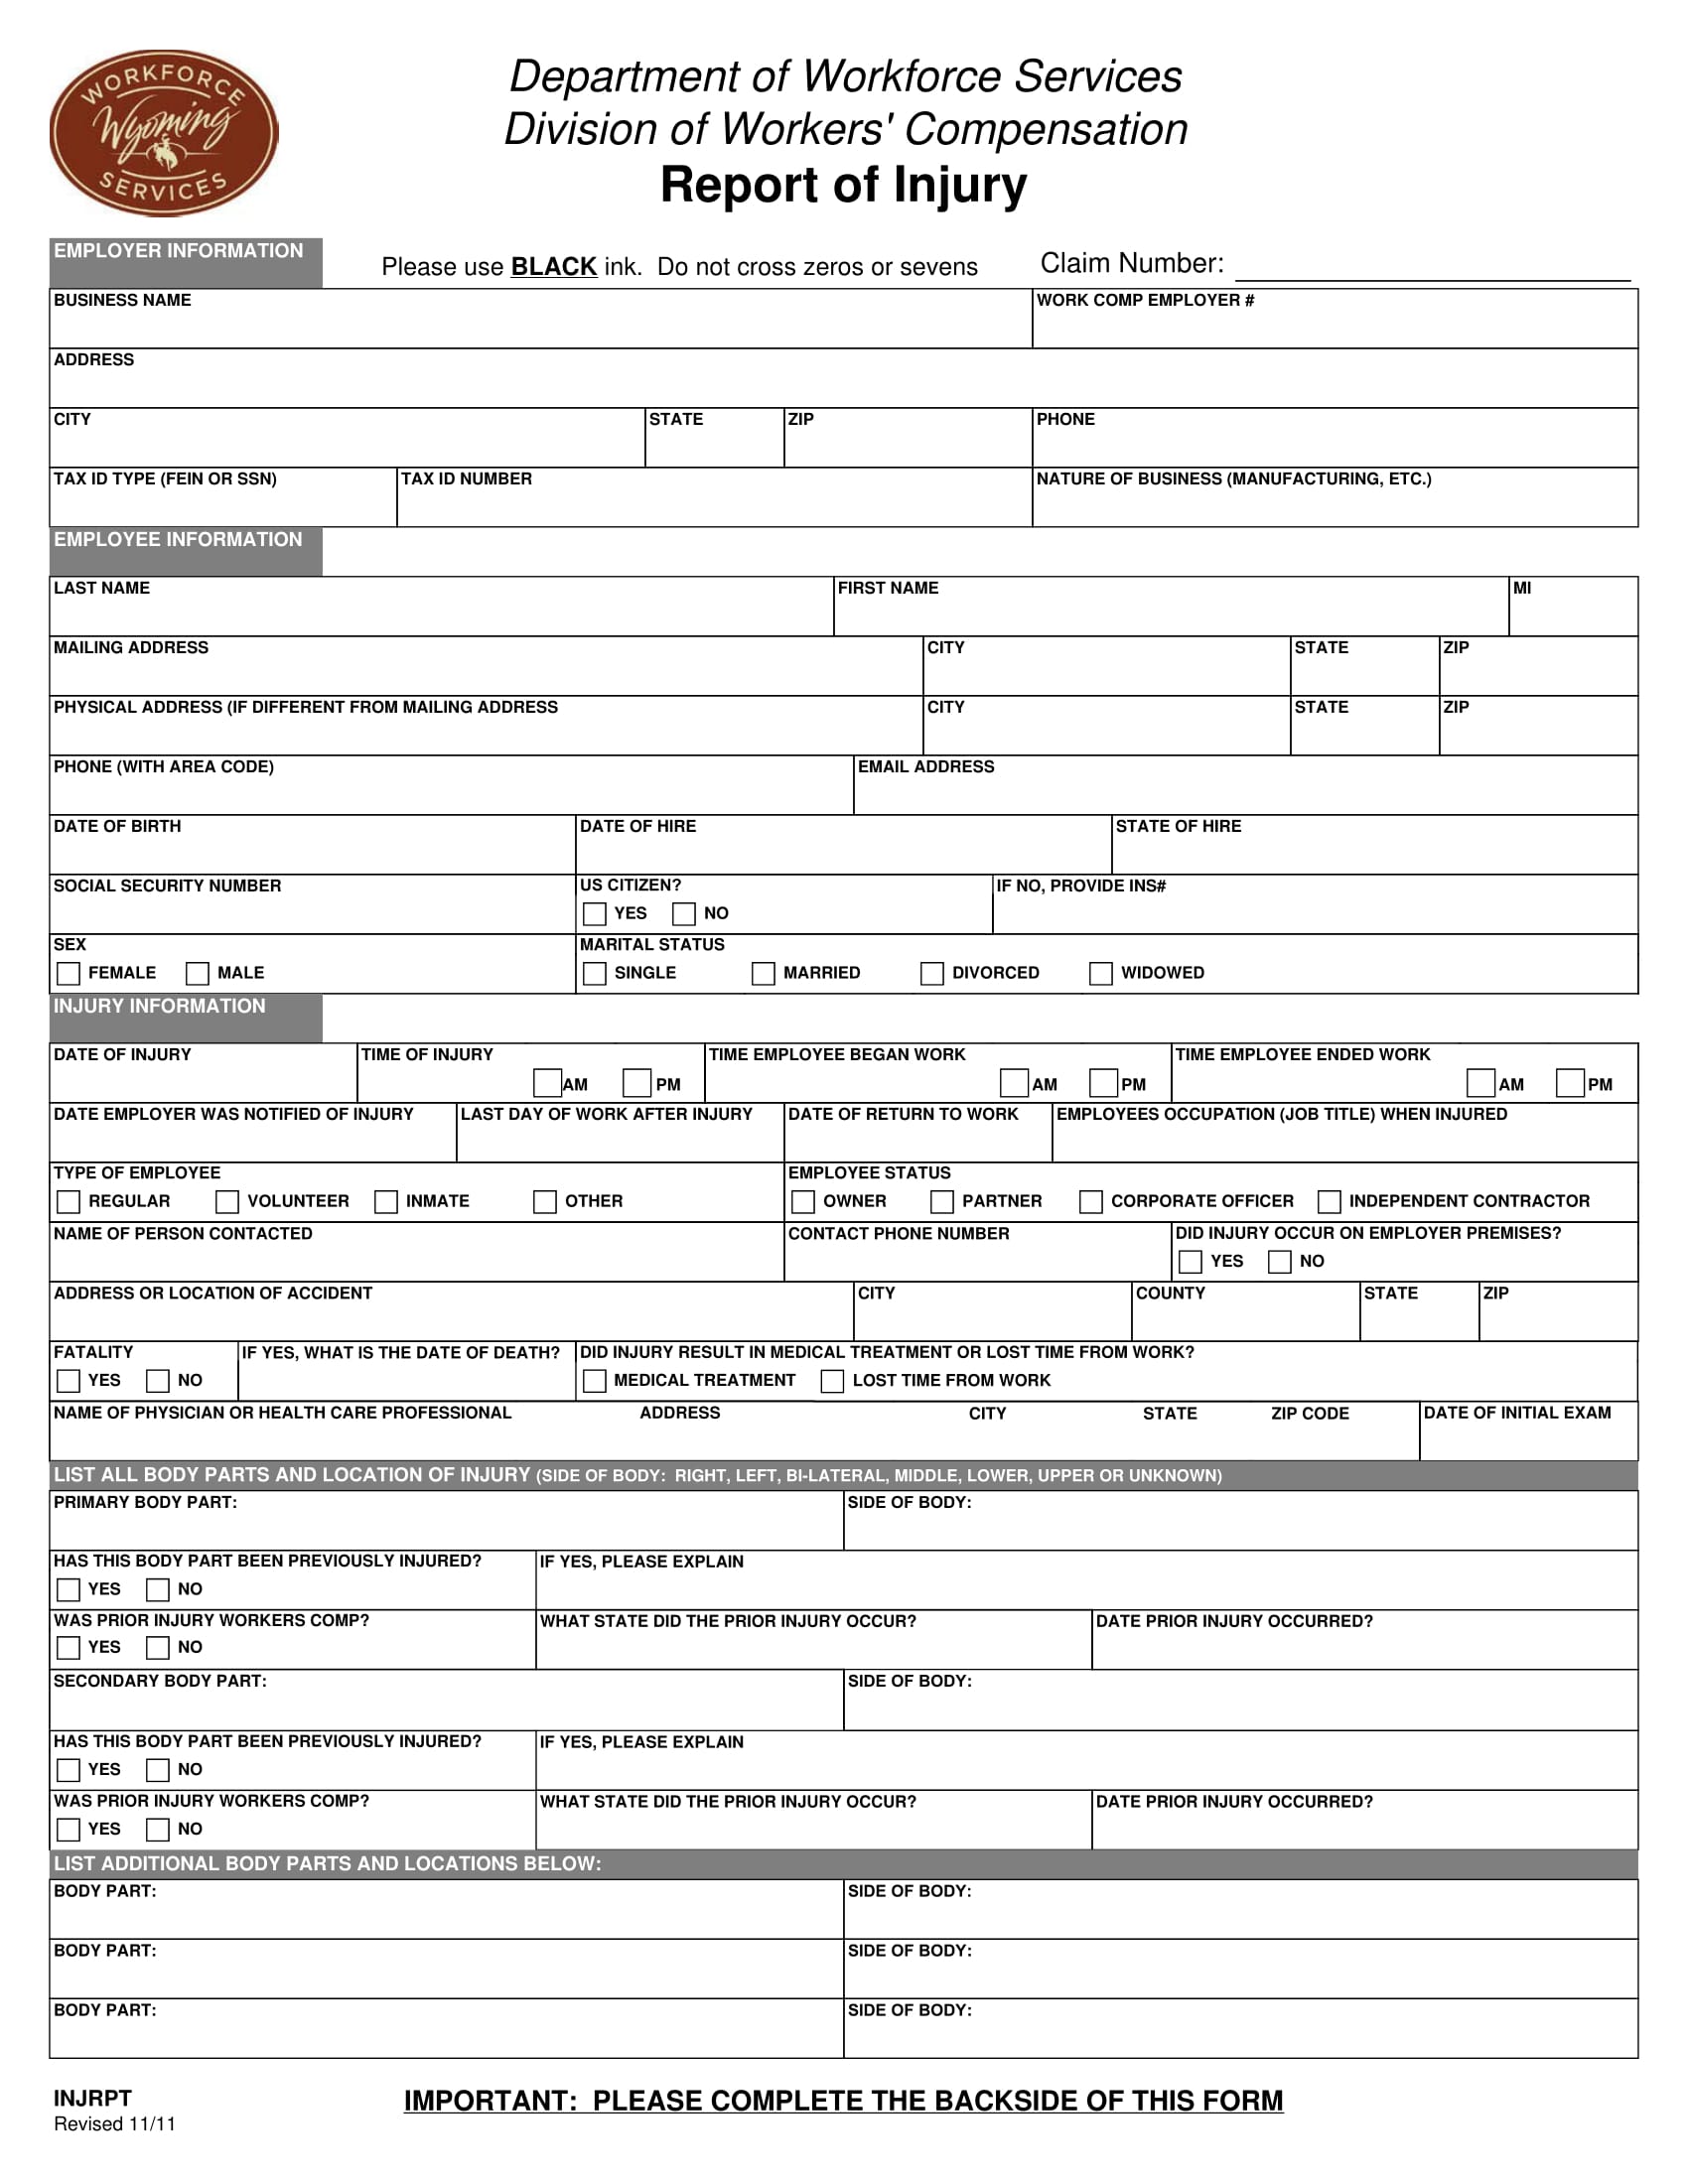 report of injury form 1